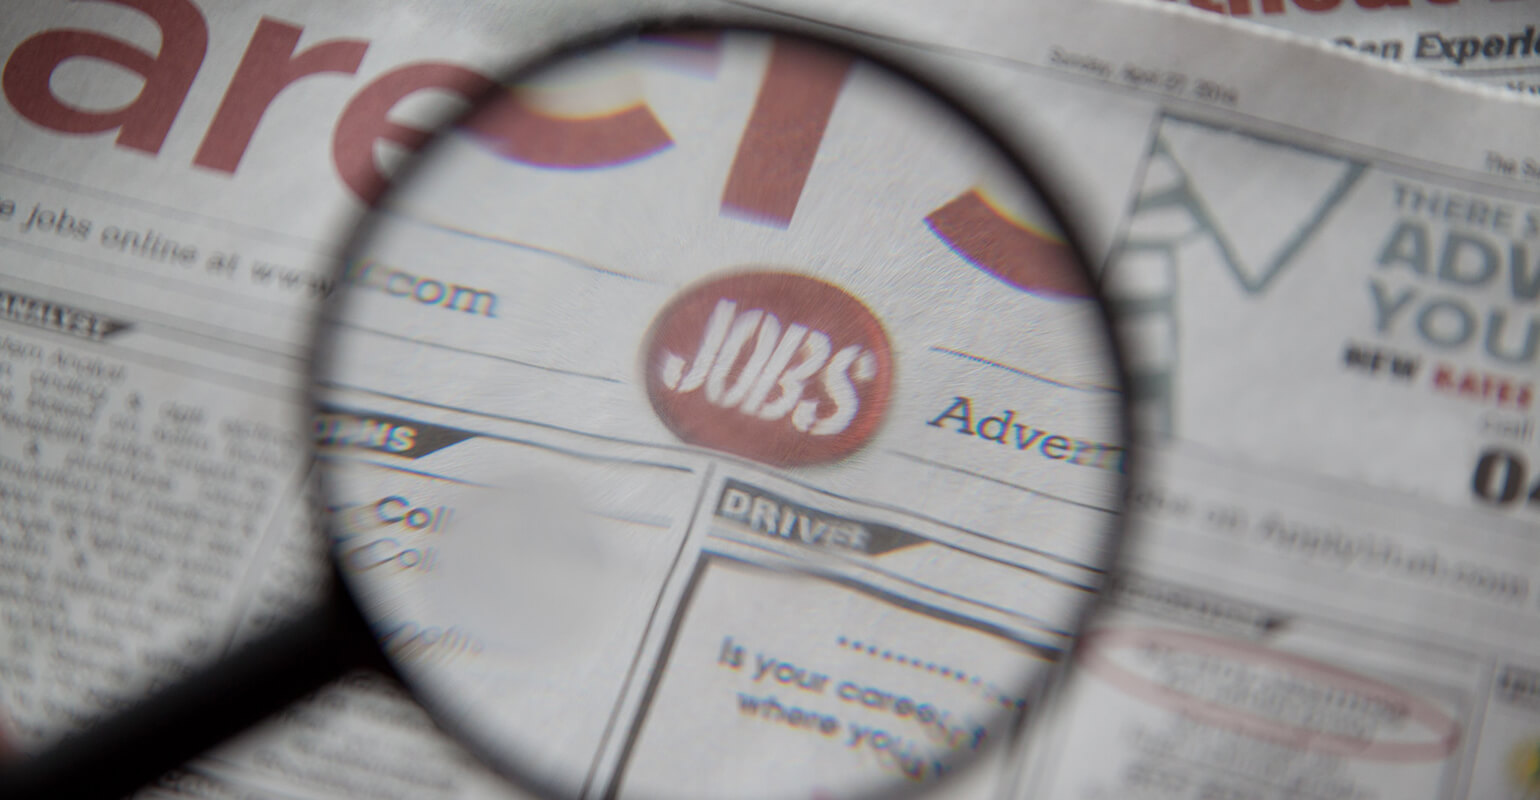 An image of a magnifying glass focusing on a newspaper. The magnifying glass is focused on the word jobs.